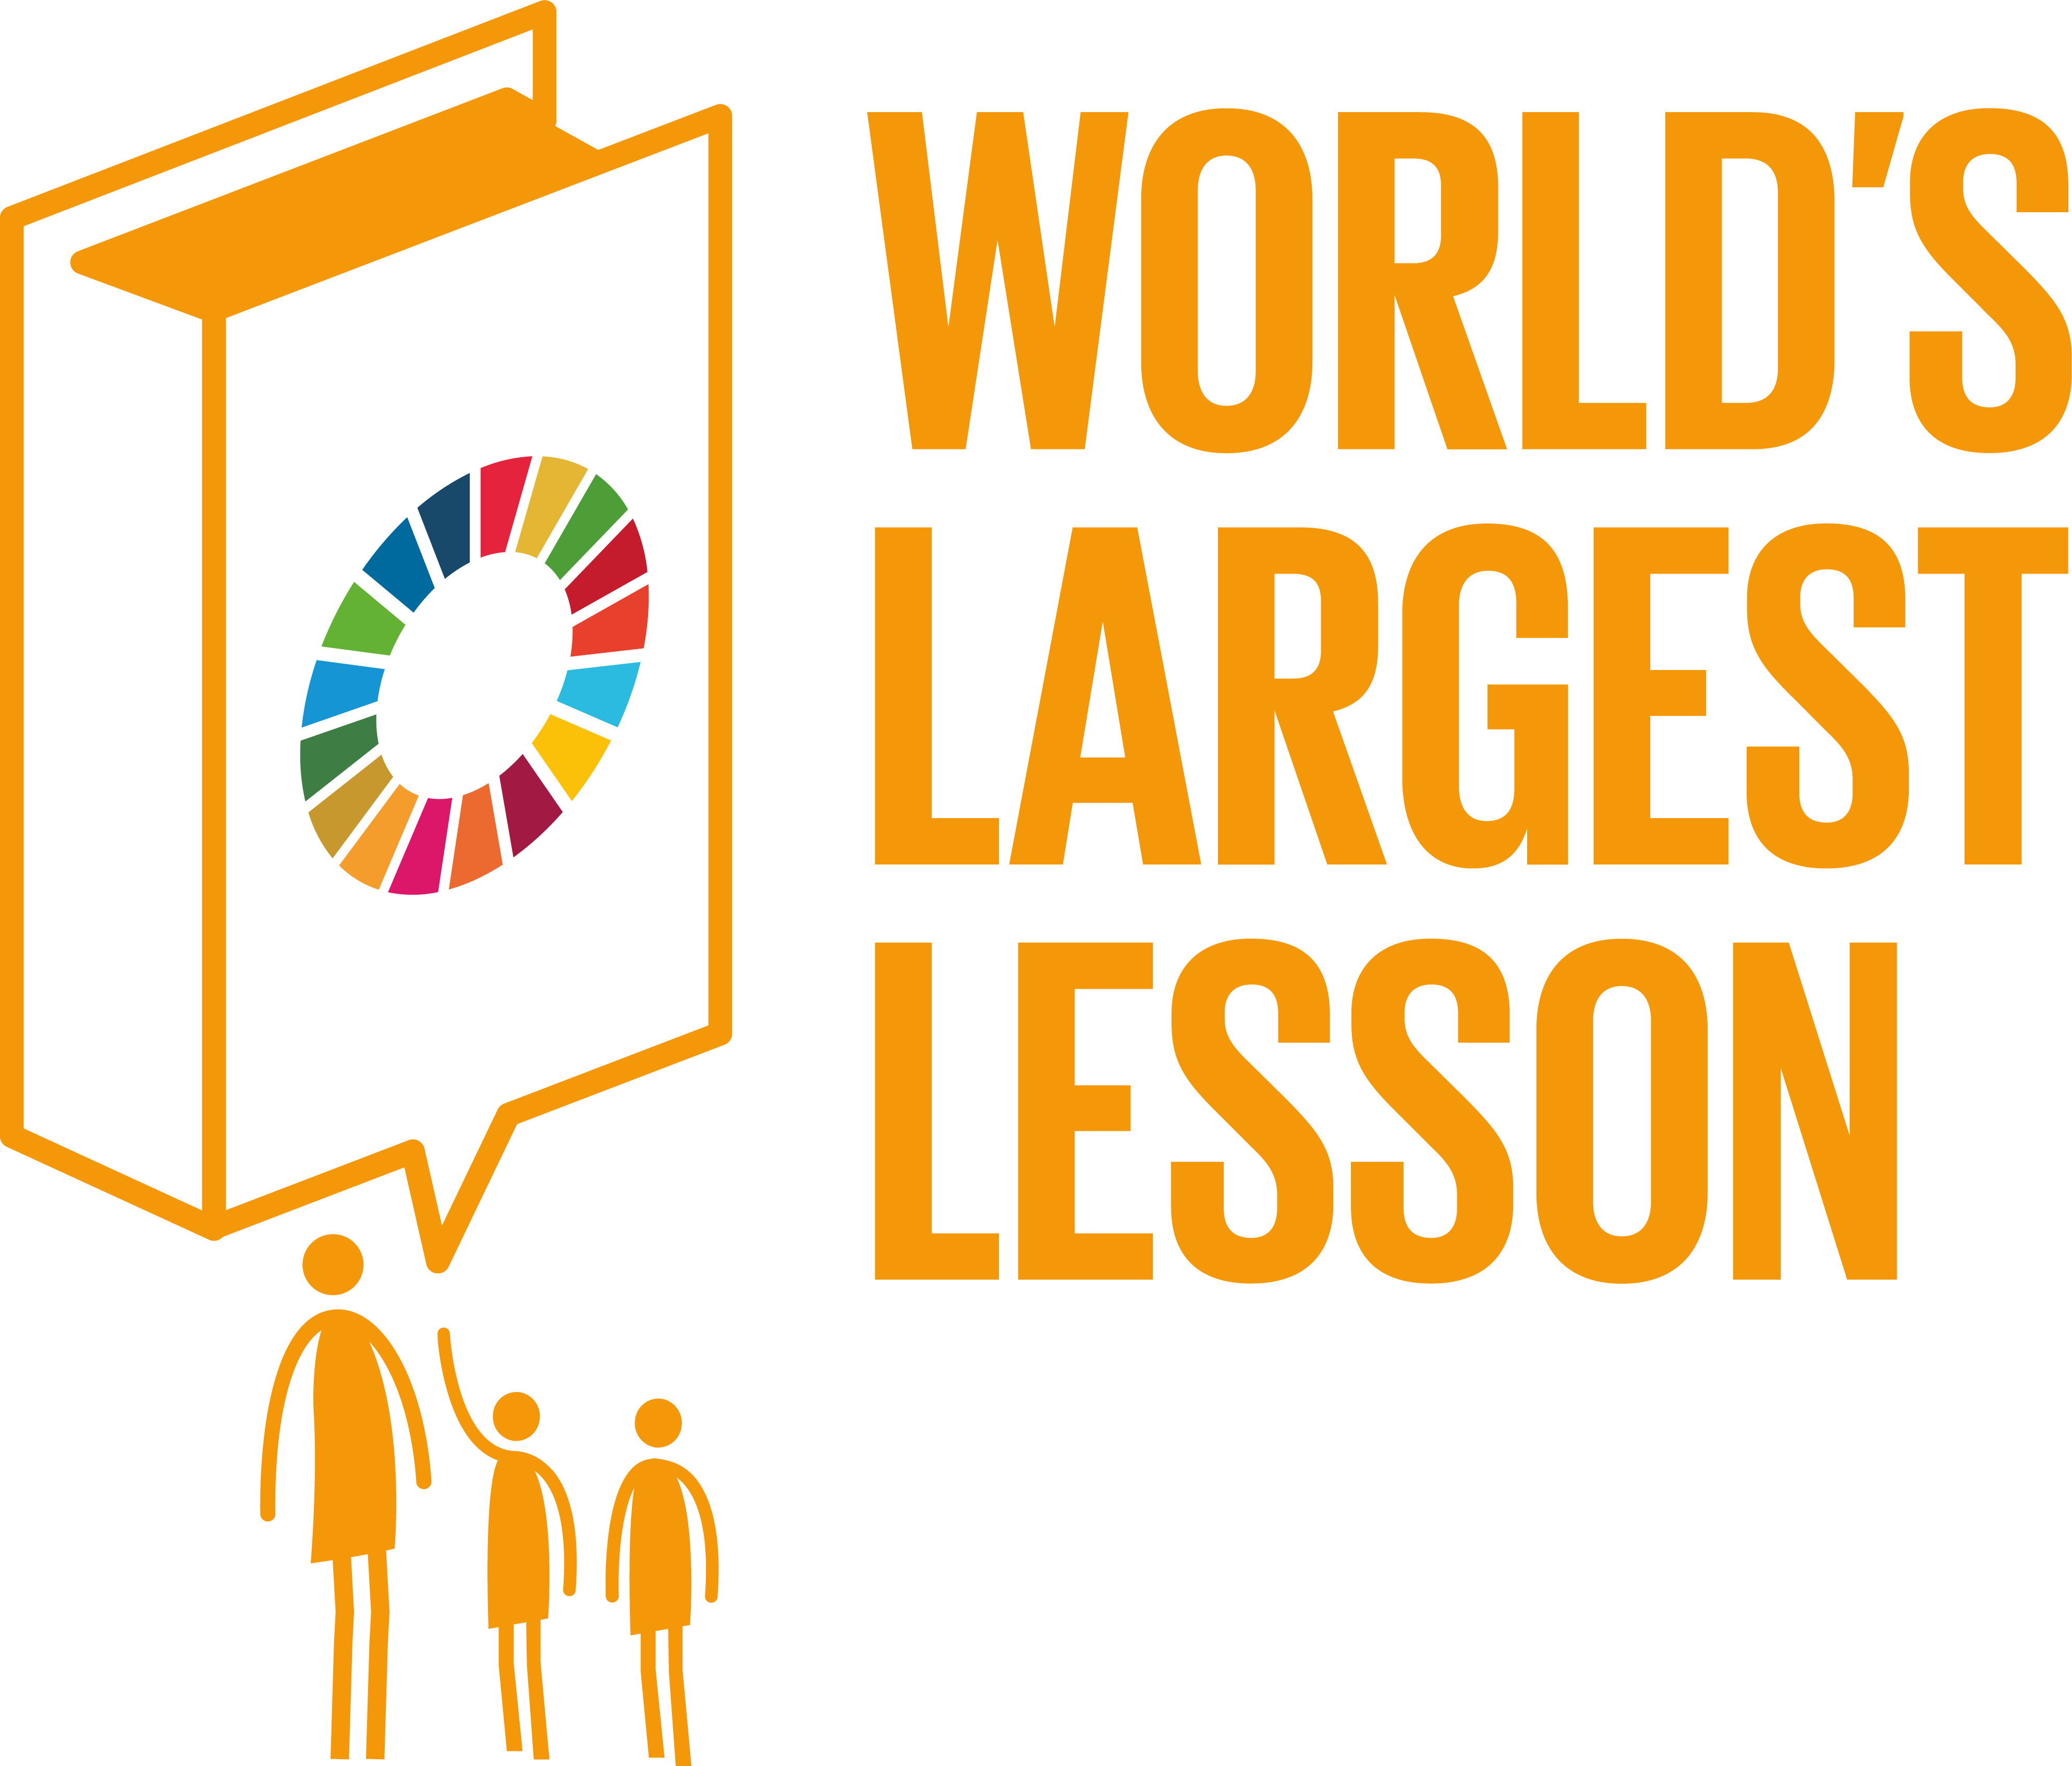 Logo reads "world's largest lesson"